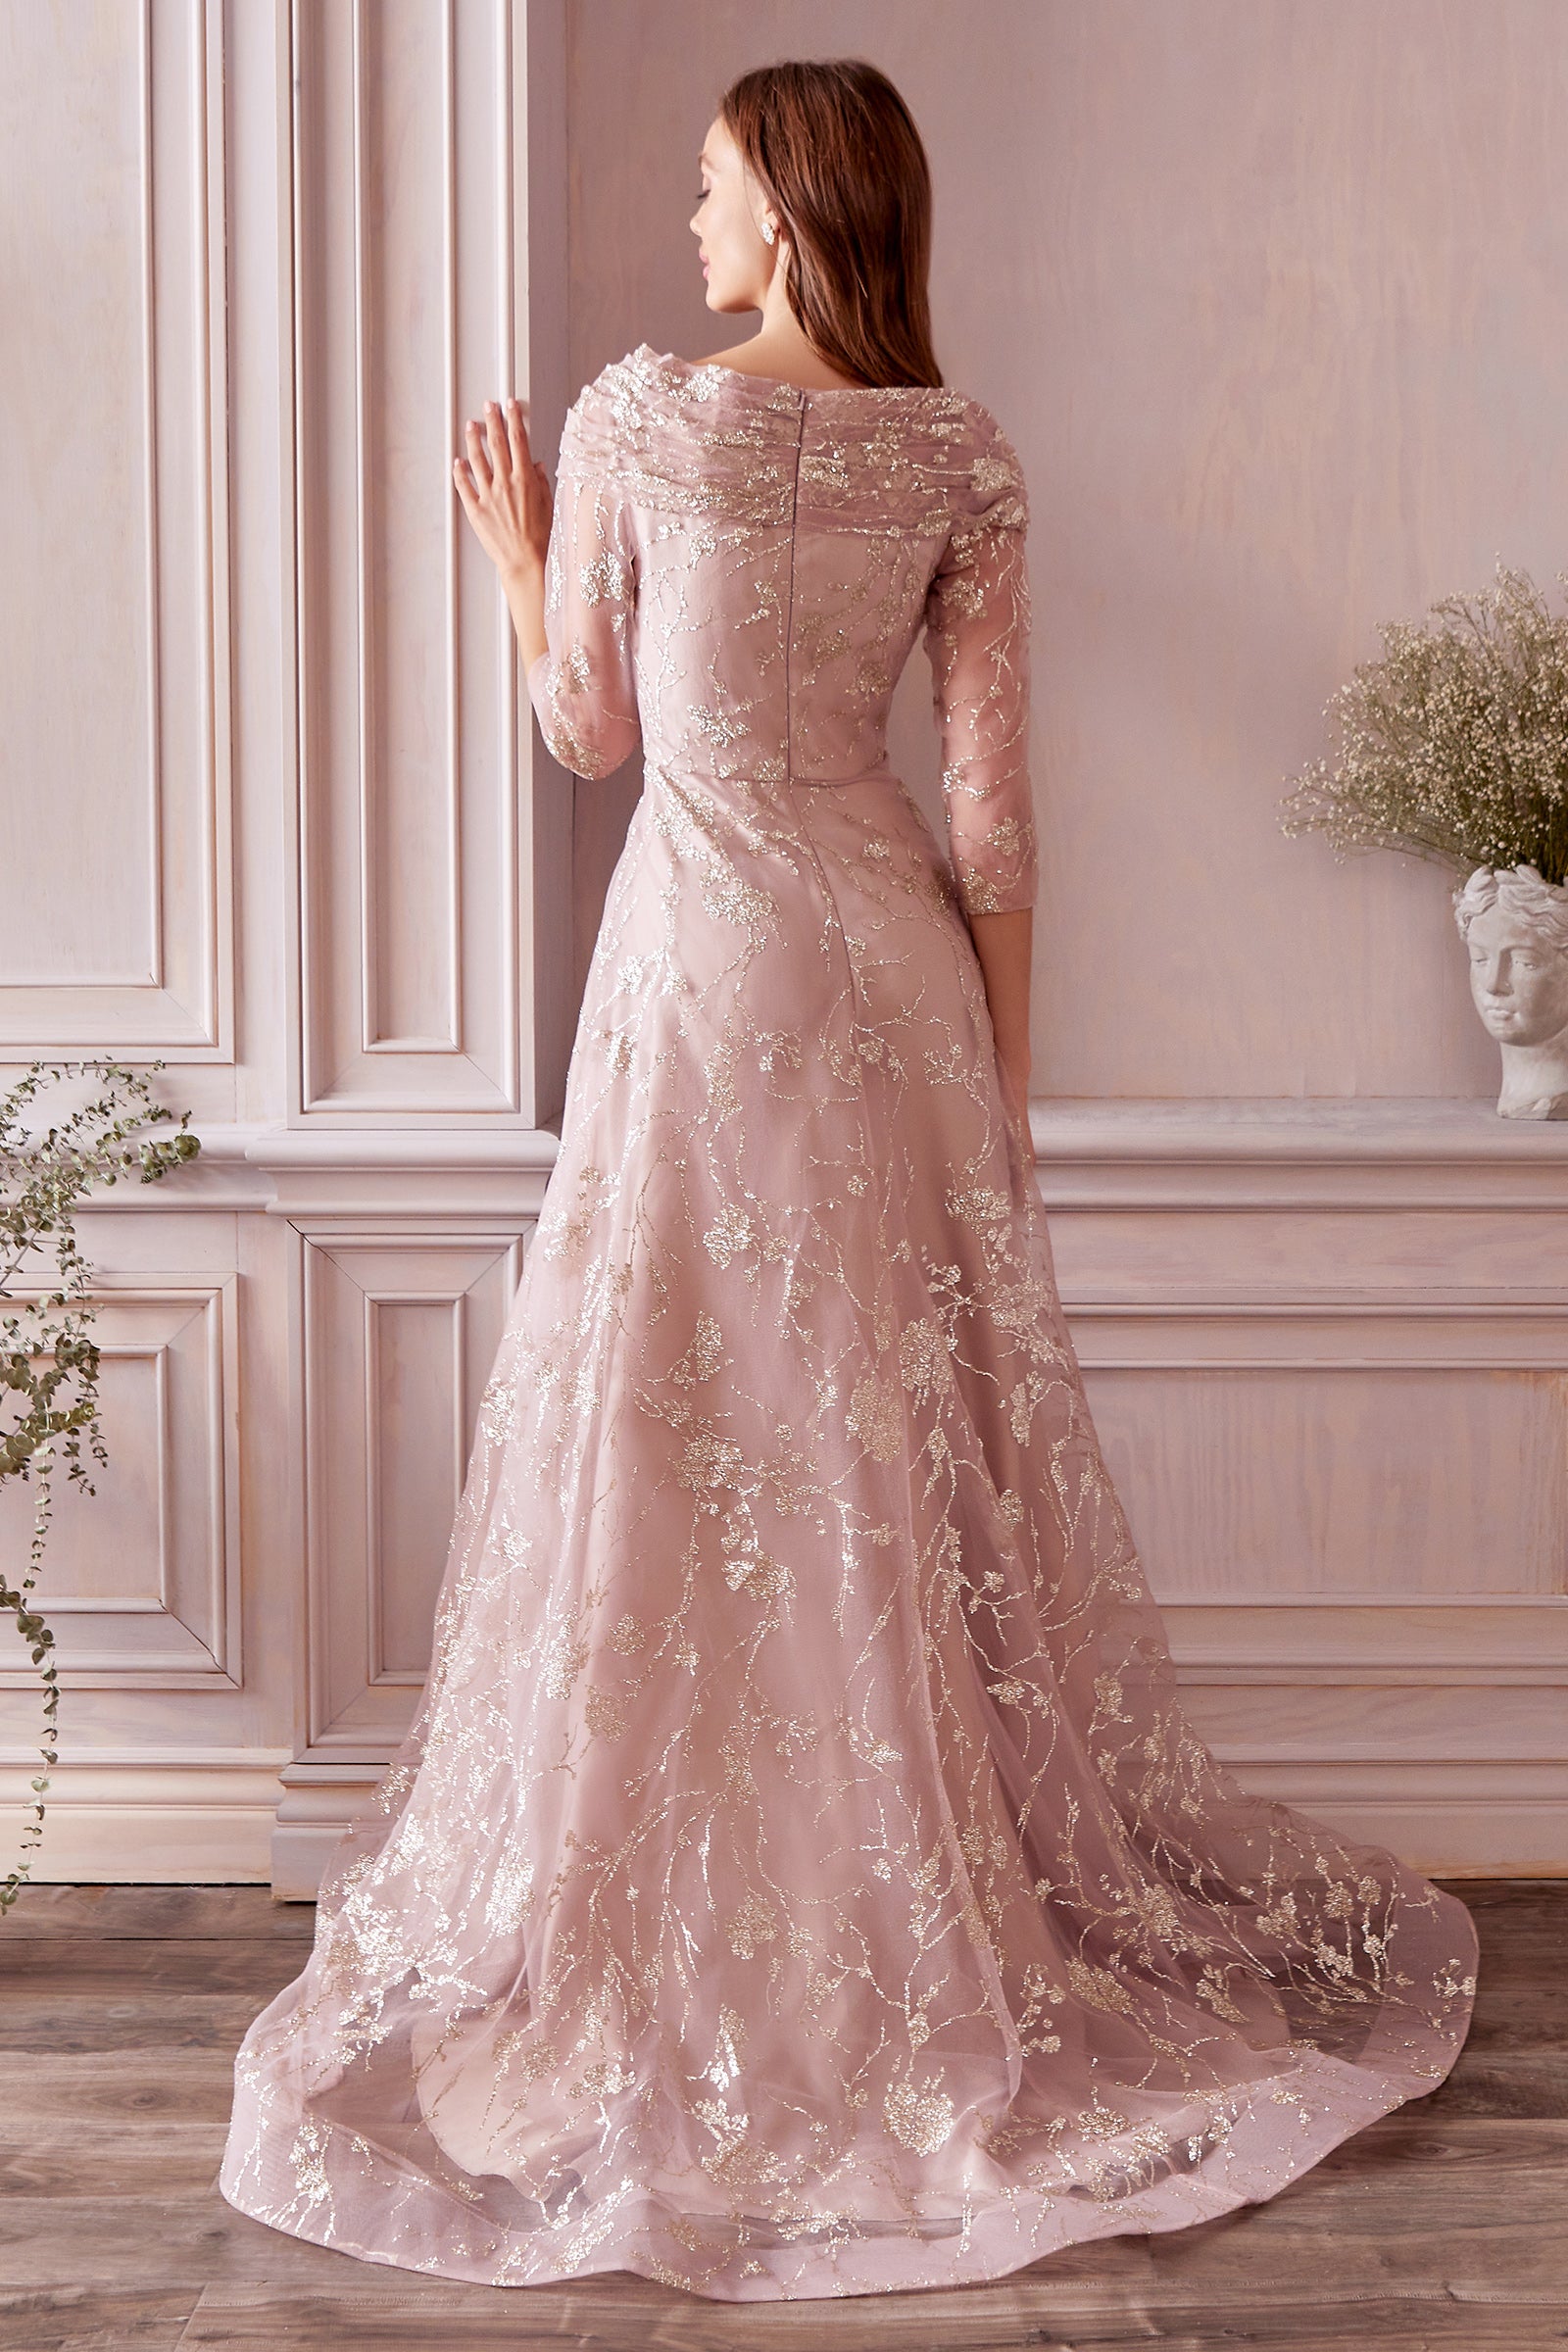 Sage and soft rose tones are trending for 2022. Golden Foliage Gown is the perfect Mother of the Bride/Groom dress that features gold metallic floral print on soft, muted pastel organza. This elegant A-line silhouette is soft and effortless. Three-quarter